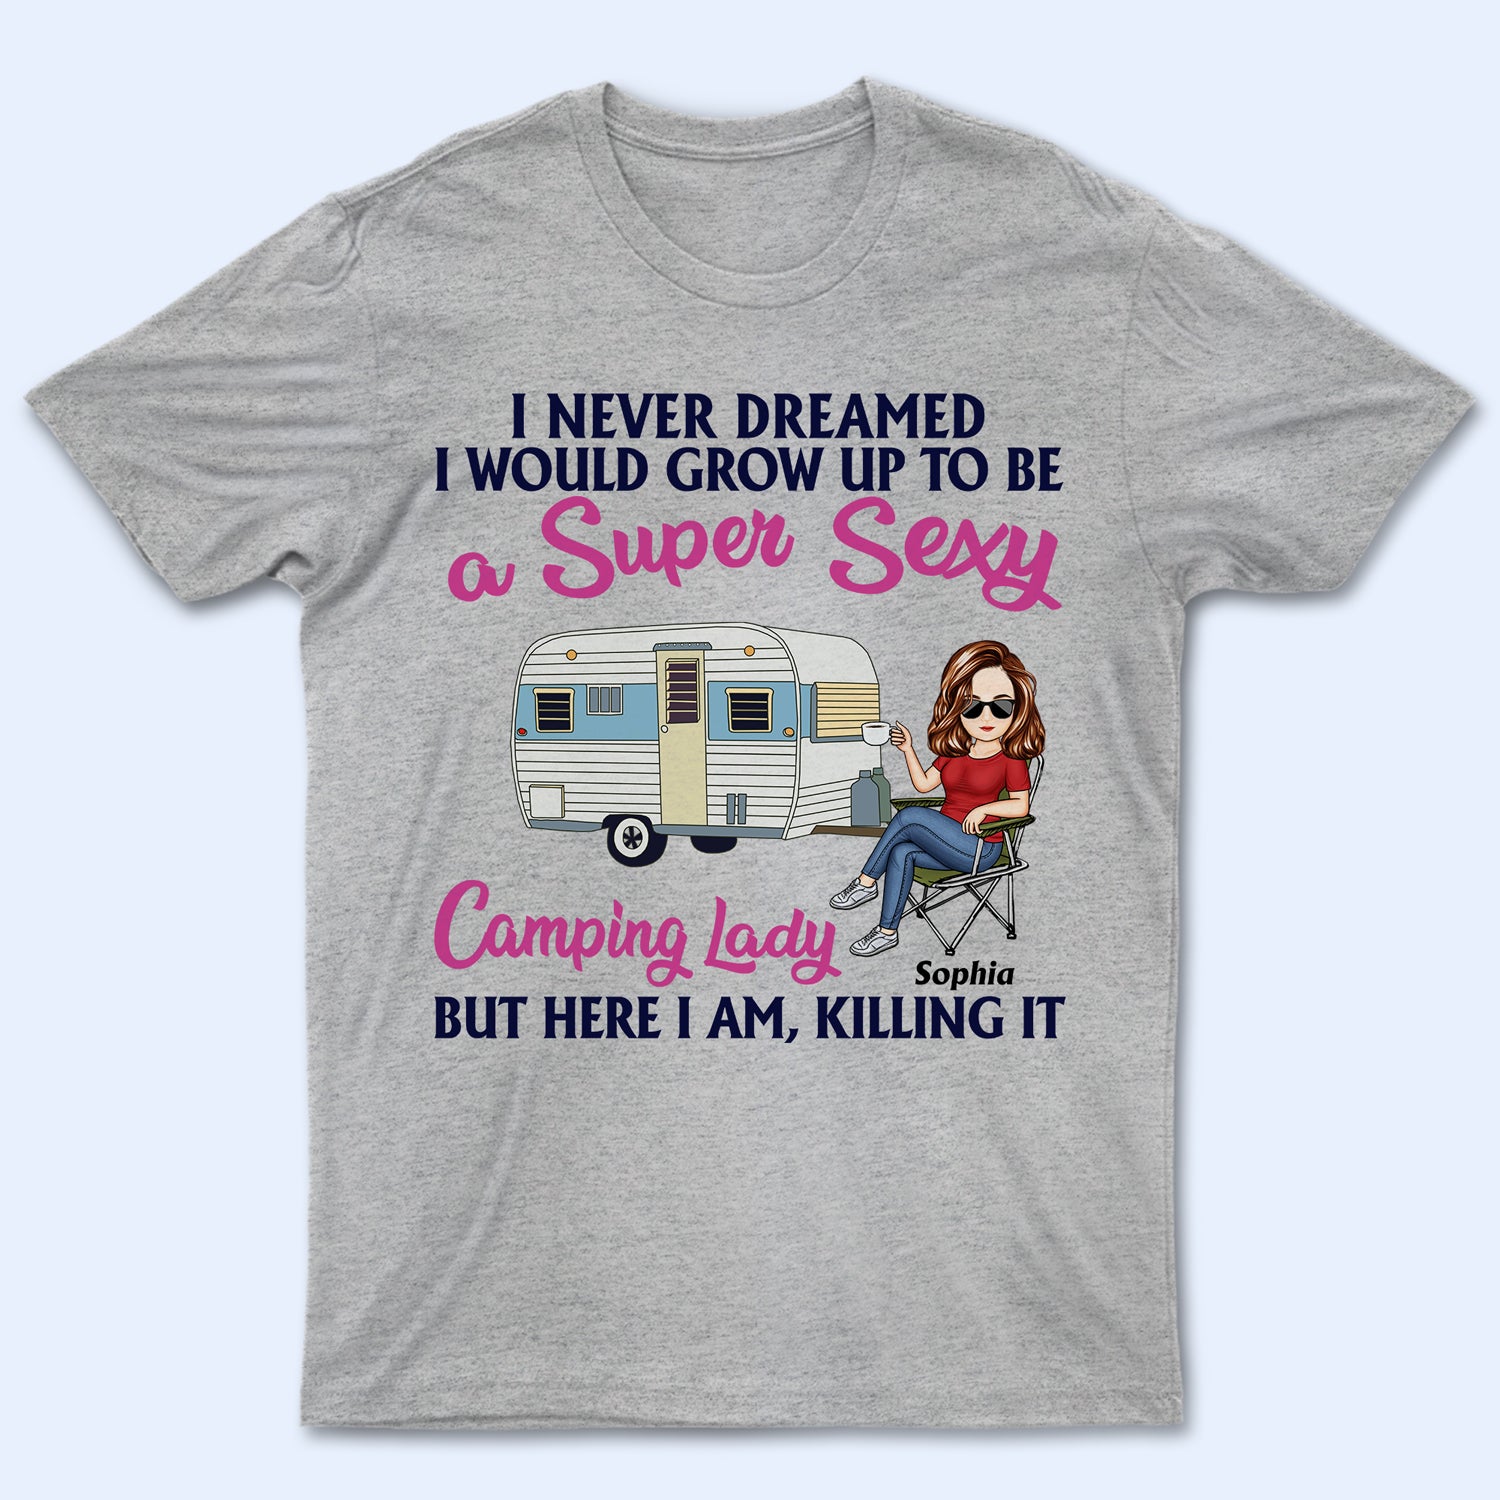 Never Dreamed I'd Grow Up To Be A Super Sexy Camping Lady - Birthday, Funny For Her, Campers - Personalized Custom T Shirt